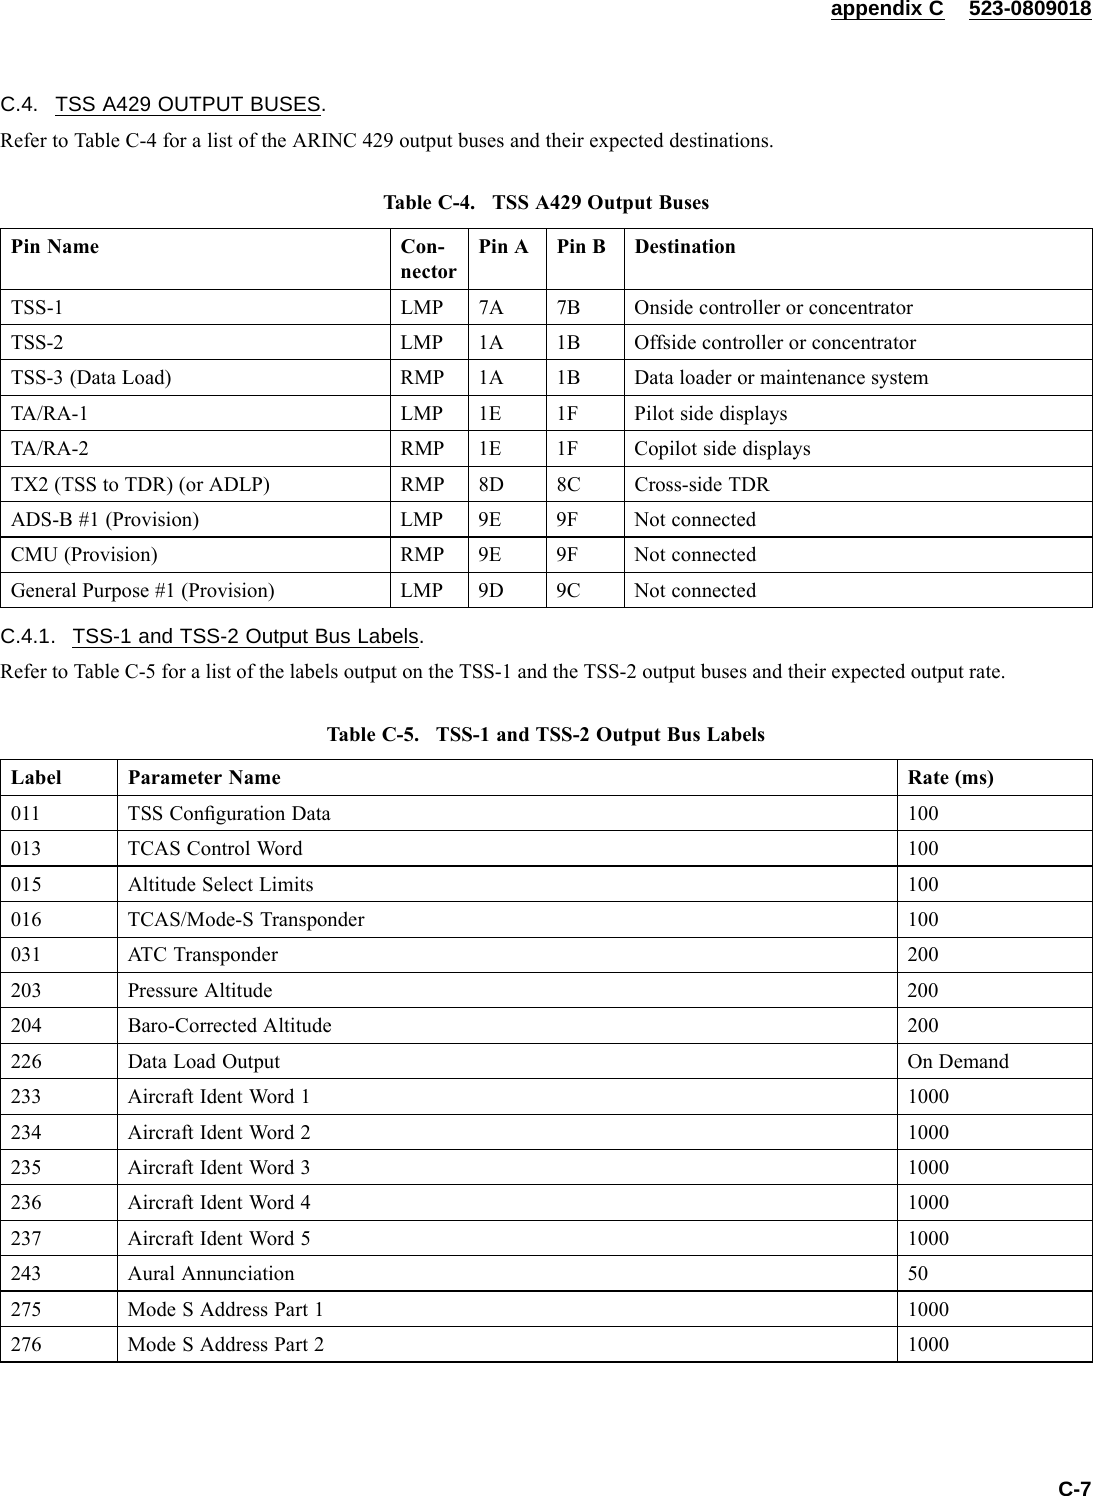 appendix C 523-0809018C.4. TSS A429 OUTPUT BUSES.Refer to Table C-4 for a list of the ARINC 429 output buses and their expected destinations.Table C-4. TSS A429 Output BusesPin Name Con-nectorPin A Pin B DestinationTSS-1 LMP 7A 7B Onside controller or concentratorTSS-2 LMP 1A 1B Offside controller or concentratorTSS-3 (Data Load) RMP 1A 1B Data loader or maintenance systemTA/RA-1 LMP 1E 1F Pilot side displaysTA/RA-2 RMP 1E 1F Copilot side displaysTX2 (TSS to TDR) (or ADLP) RMP 8D 8C Cross-side TDRADS-B #1 (Provision) LMP 9E 9F Not connectedCMU (Provision) RMP 9E 9F Not connectedGeneral Purpose #1 (Provision) LMP 9D 9C Not connectedC.4.1. TSS-1 and TSS-2 Output Bus Labels.Refer to Table C-5 for a list of the labels output on the TSS-1 and the TSS-2 output buses and their expected output rate.Table C-5. TSS-1 and TSS-2 Output Bus LabelsLabel Parameter Name Rate (ms)011 TSS Conﬁguration Data 100013 TCAS Control Word 100015 Altitude Select Limits 100016 TCAS/Mode-S Transponder 100031 ATC Transponder 200203 Pressure Altitude 200204 Baro-Corrected Altitude 200226 Data Load Output On Demand233 Aircraft Ident Word 1 1000234 Aircraft Ident Word 2 1000235 Aircraft Ident Word 3 1000236 Aircraft Ident Word 4 1000237 Aircraft Ident Word 5 1000243 Aural Annunciation 50275 Mode S Address Part 1 1000276 Mode S Address Part 2 1000C-7